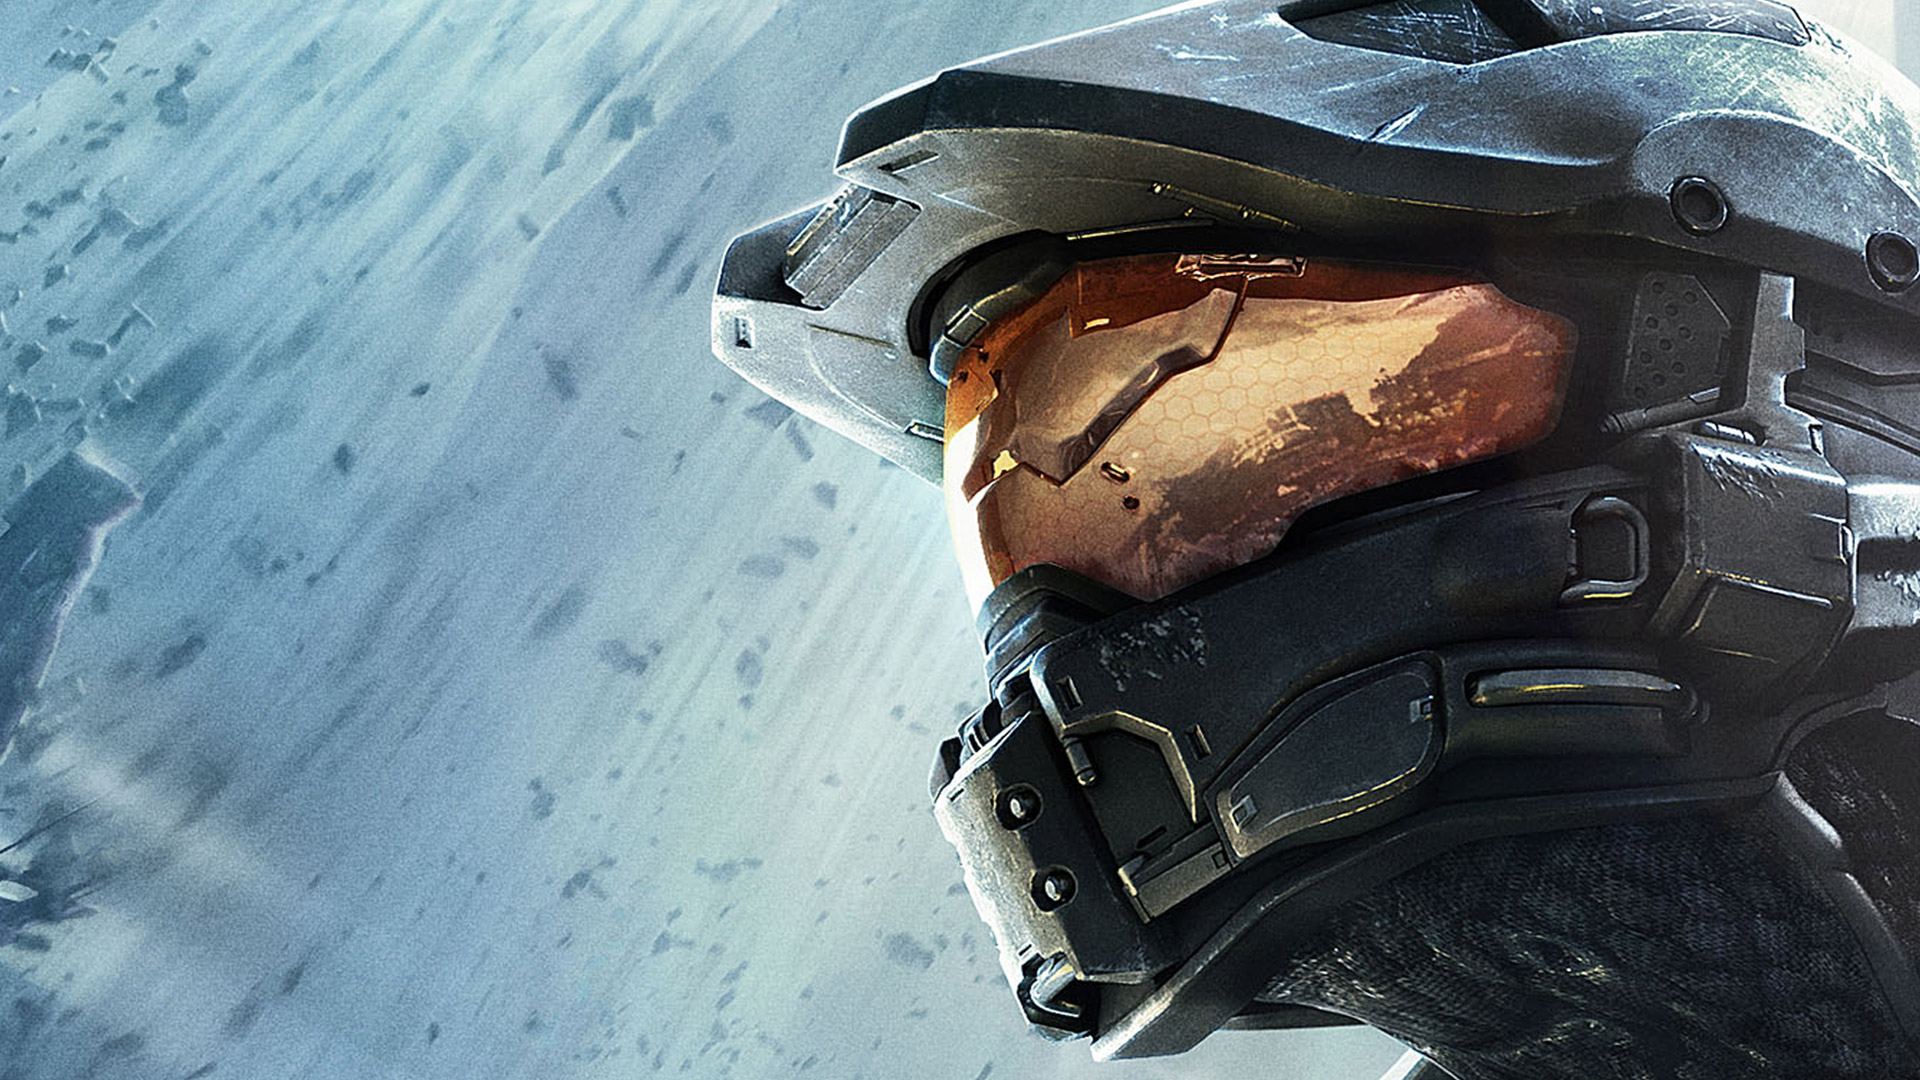 Halo 4 Wide Exclusive HD Wallpapers 2995